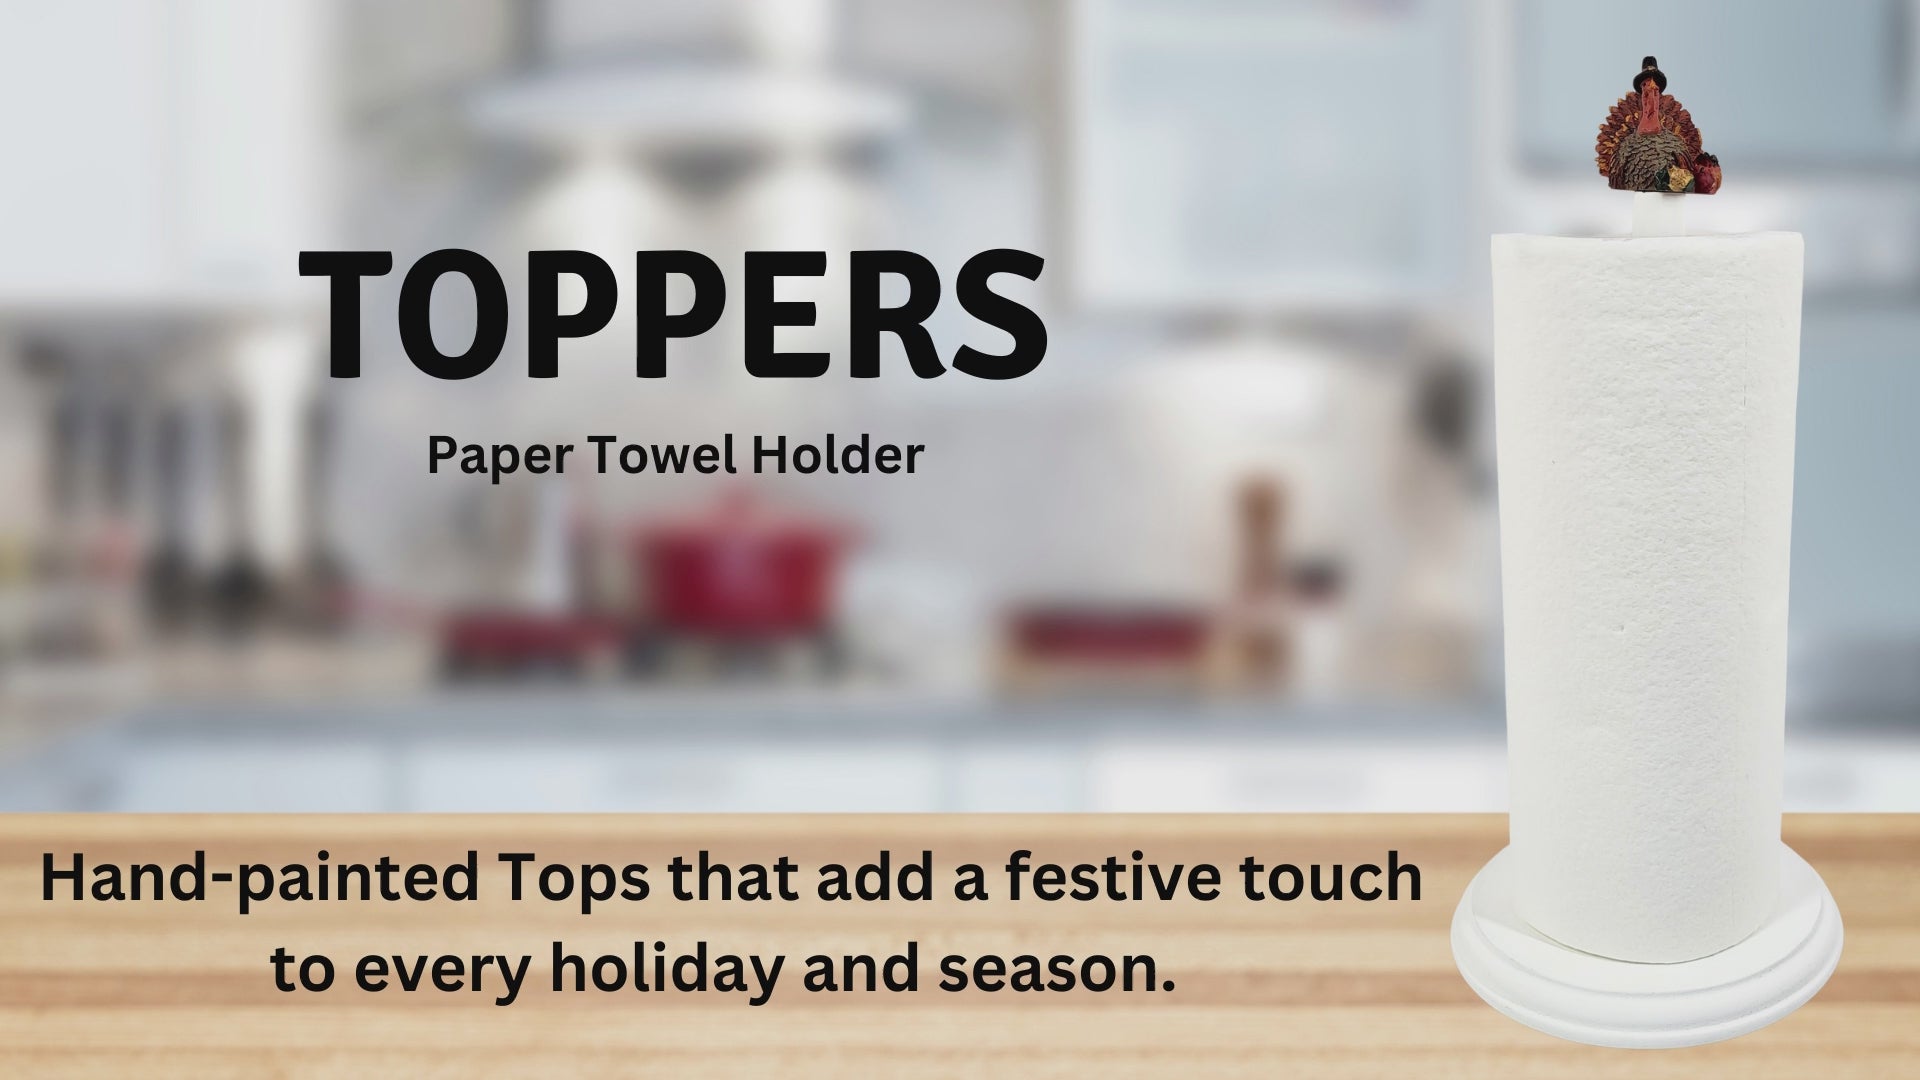 Toppers Paper Towel Holder With Interchangeable Tops for All Holidays